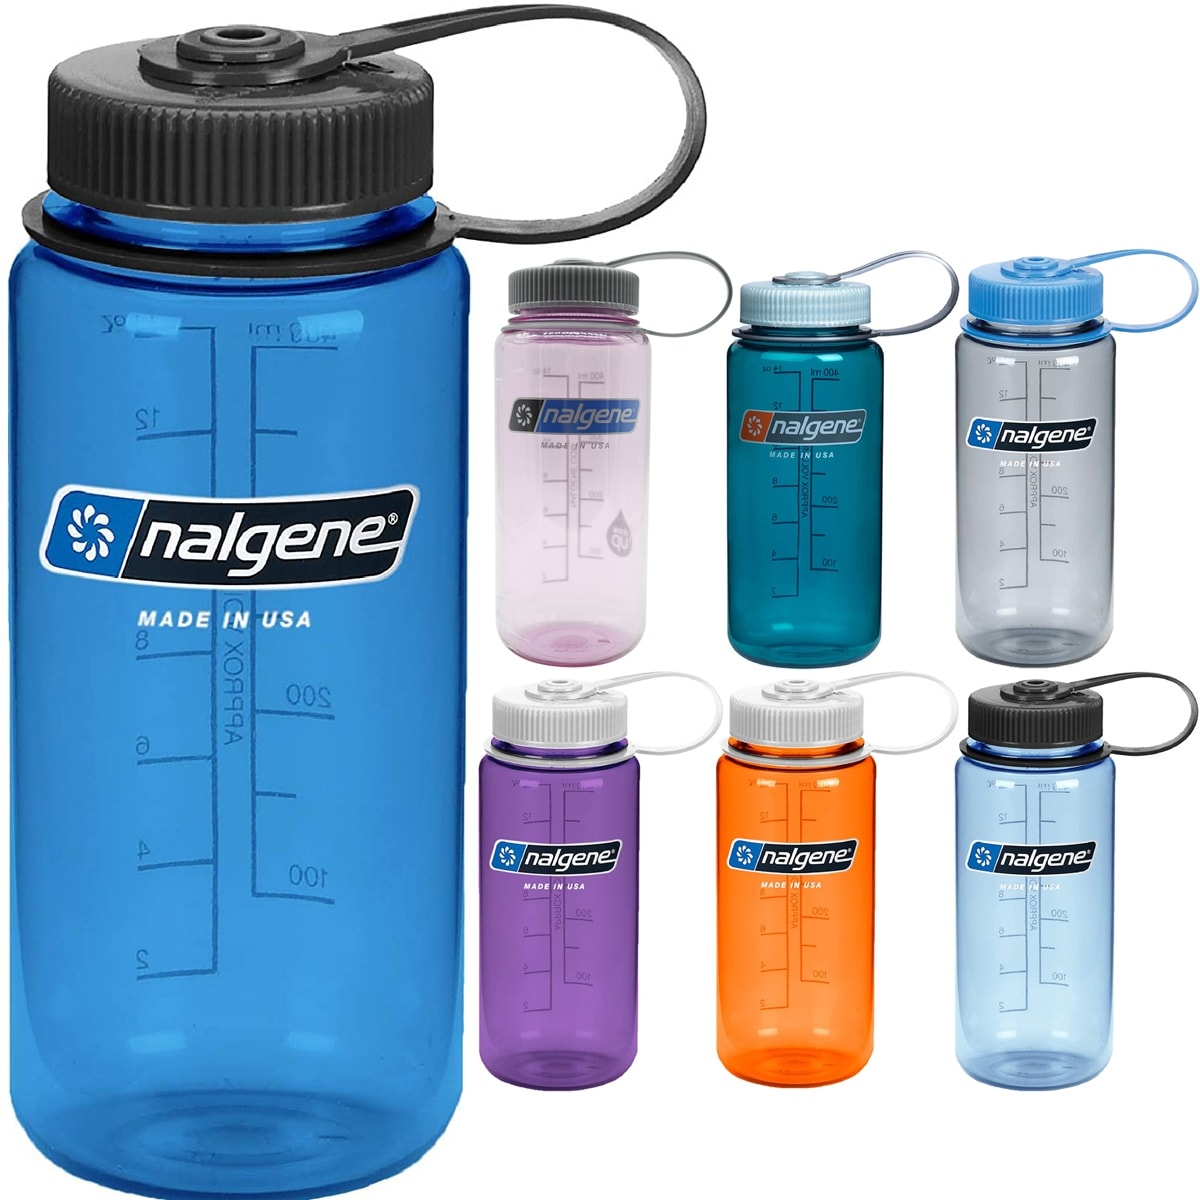 https://ak1.ostkcdn.com/images/products/is/images/direct/04f78848f3d45bbe095a0fed0522cf4aef5f4e6b/Nalgene-Tritan-16-oz.-Wide-Mouth-Water-Bottle.jpg